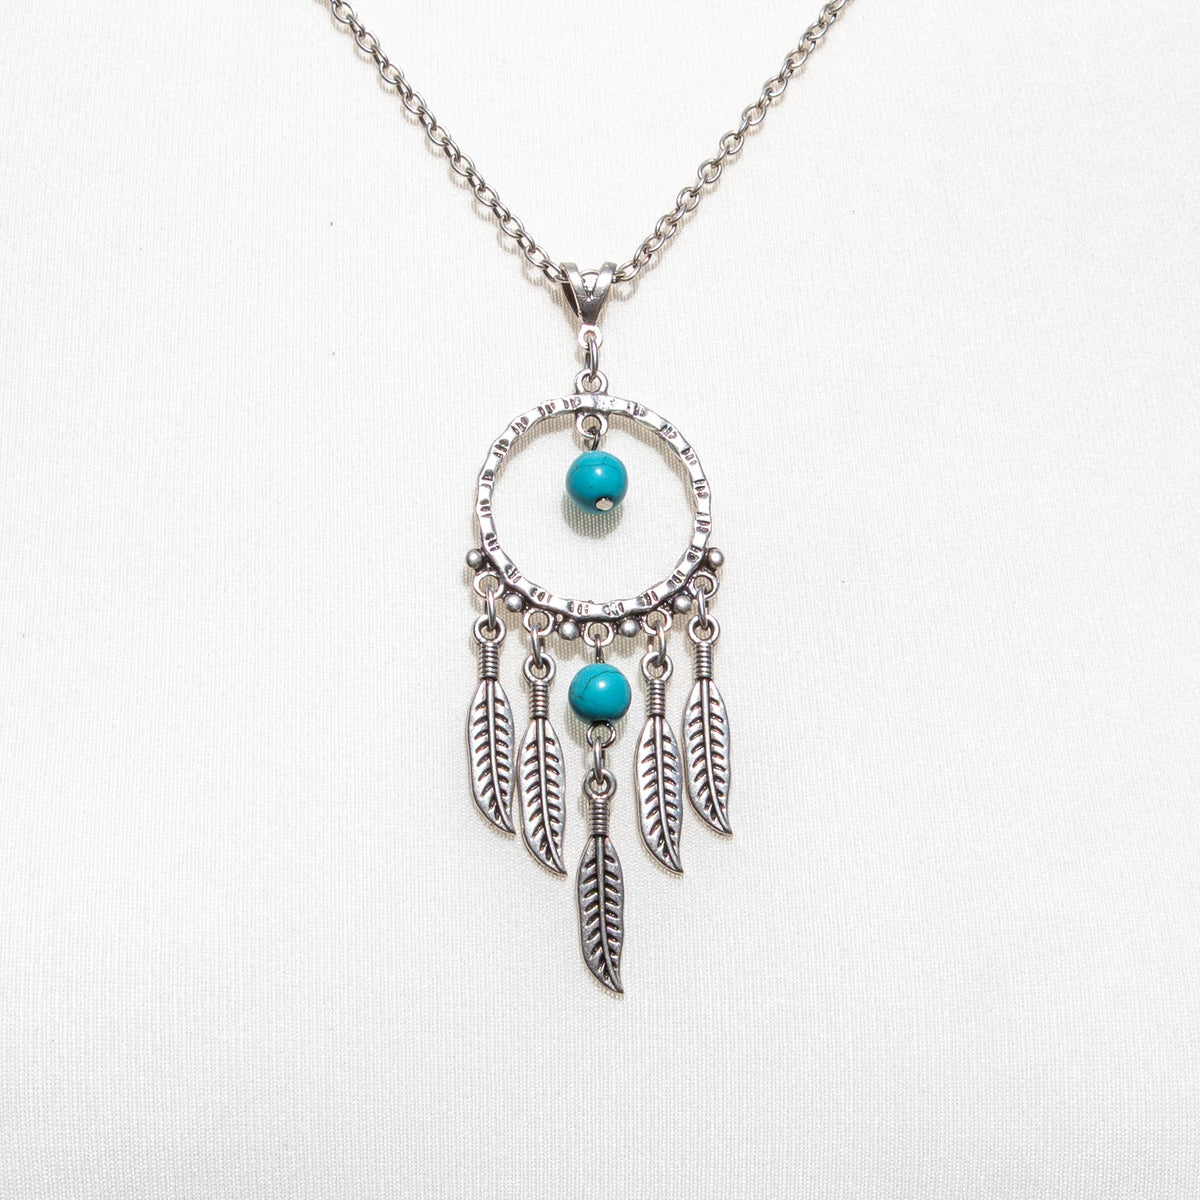 Dreamcatcher Necklace With Turquoise Stones | Necklace - The Naughty Shrew